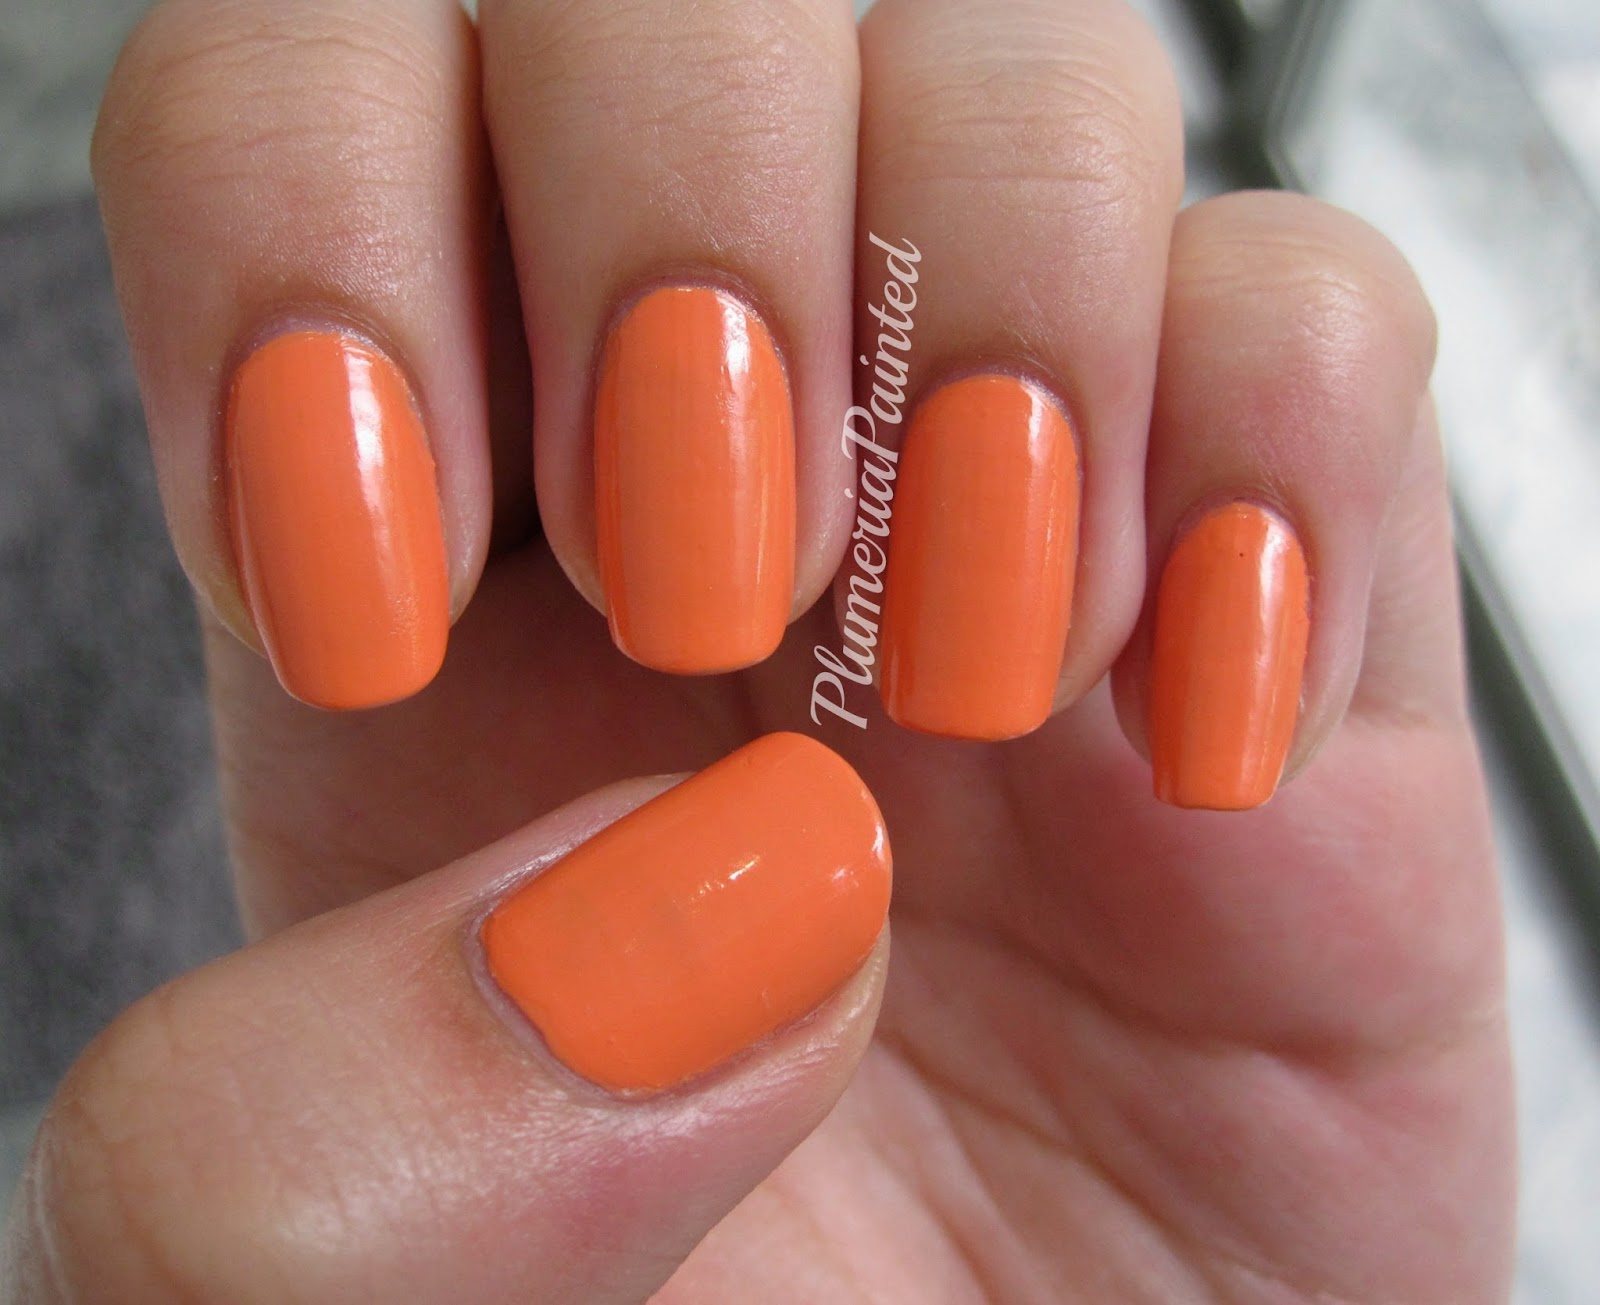 The Autumn Season Beckons the Terra Cotta Nail Color | ND Nails Supply